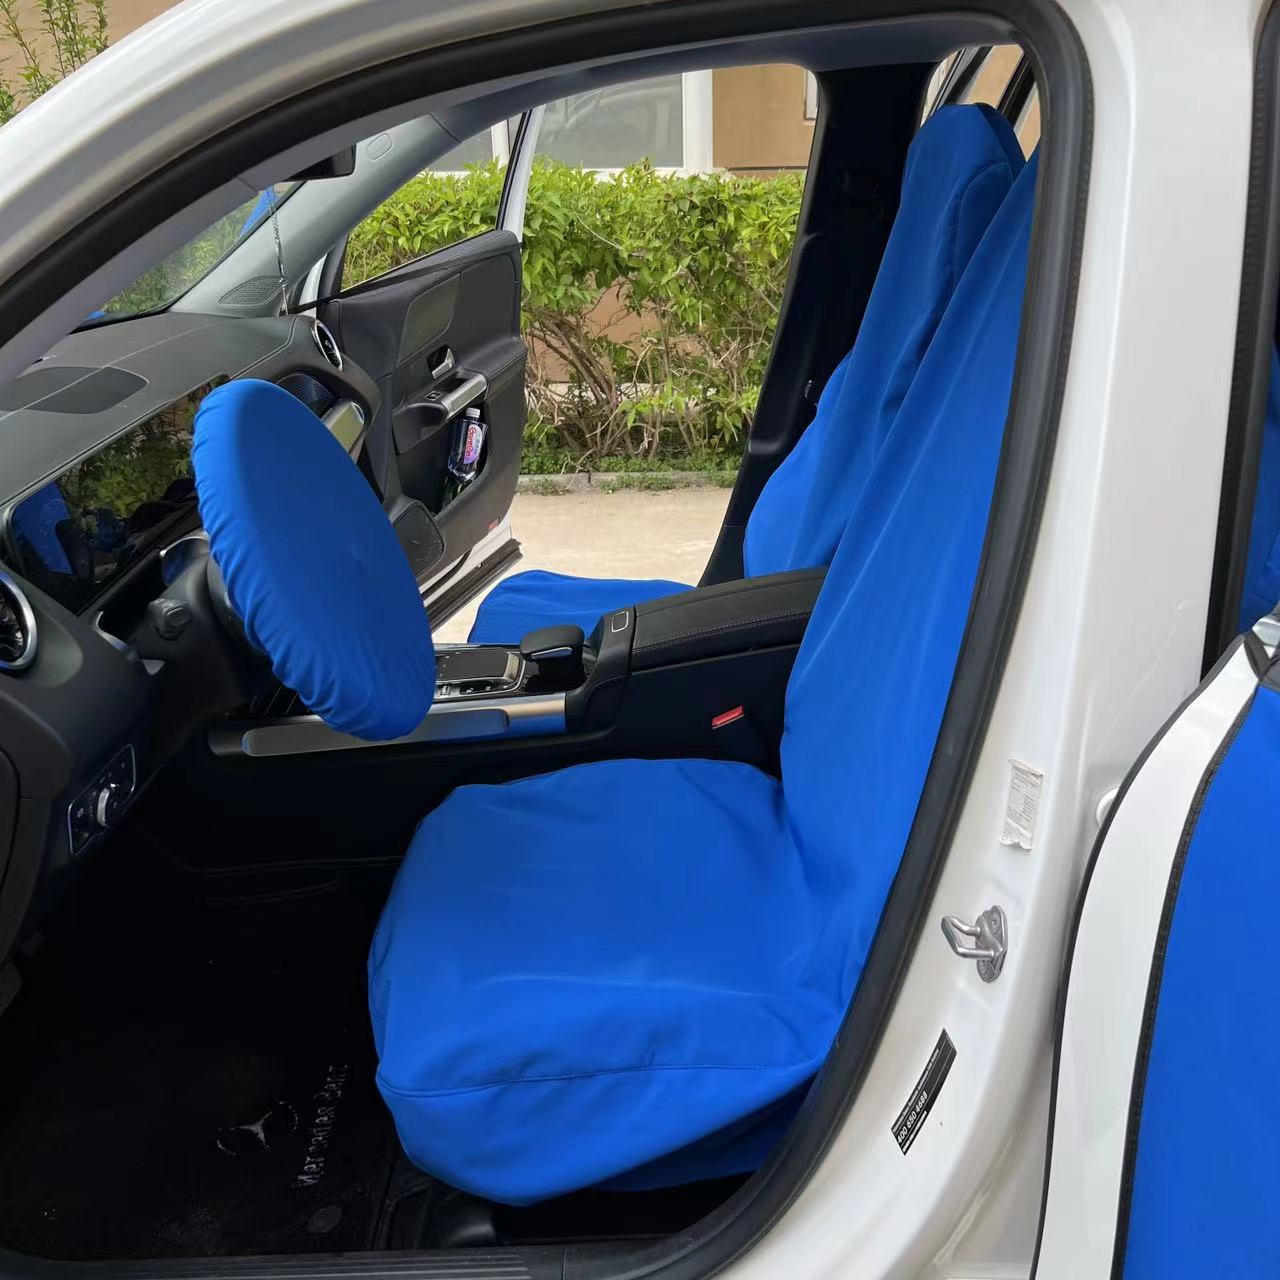 Protective Car Seat Cover securely fitted, demonstrating its effectiveness in preventing messes during vehicle maintenance tasks.